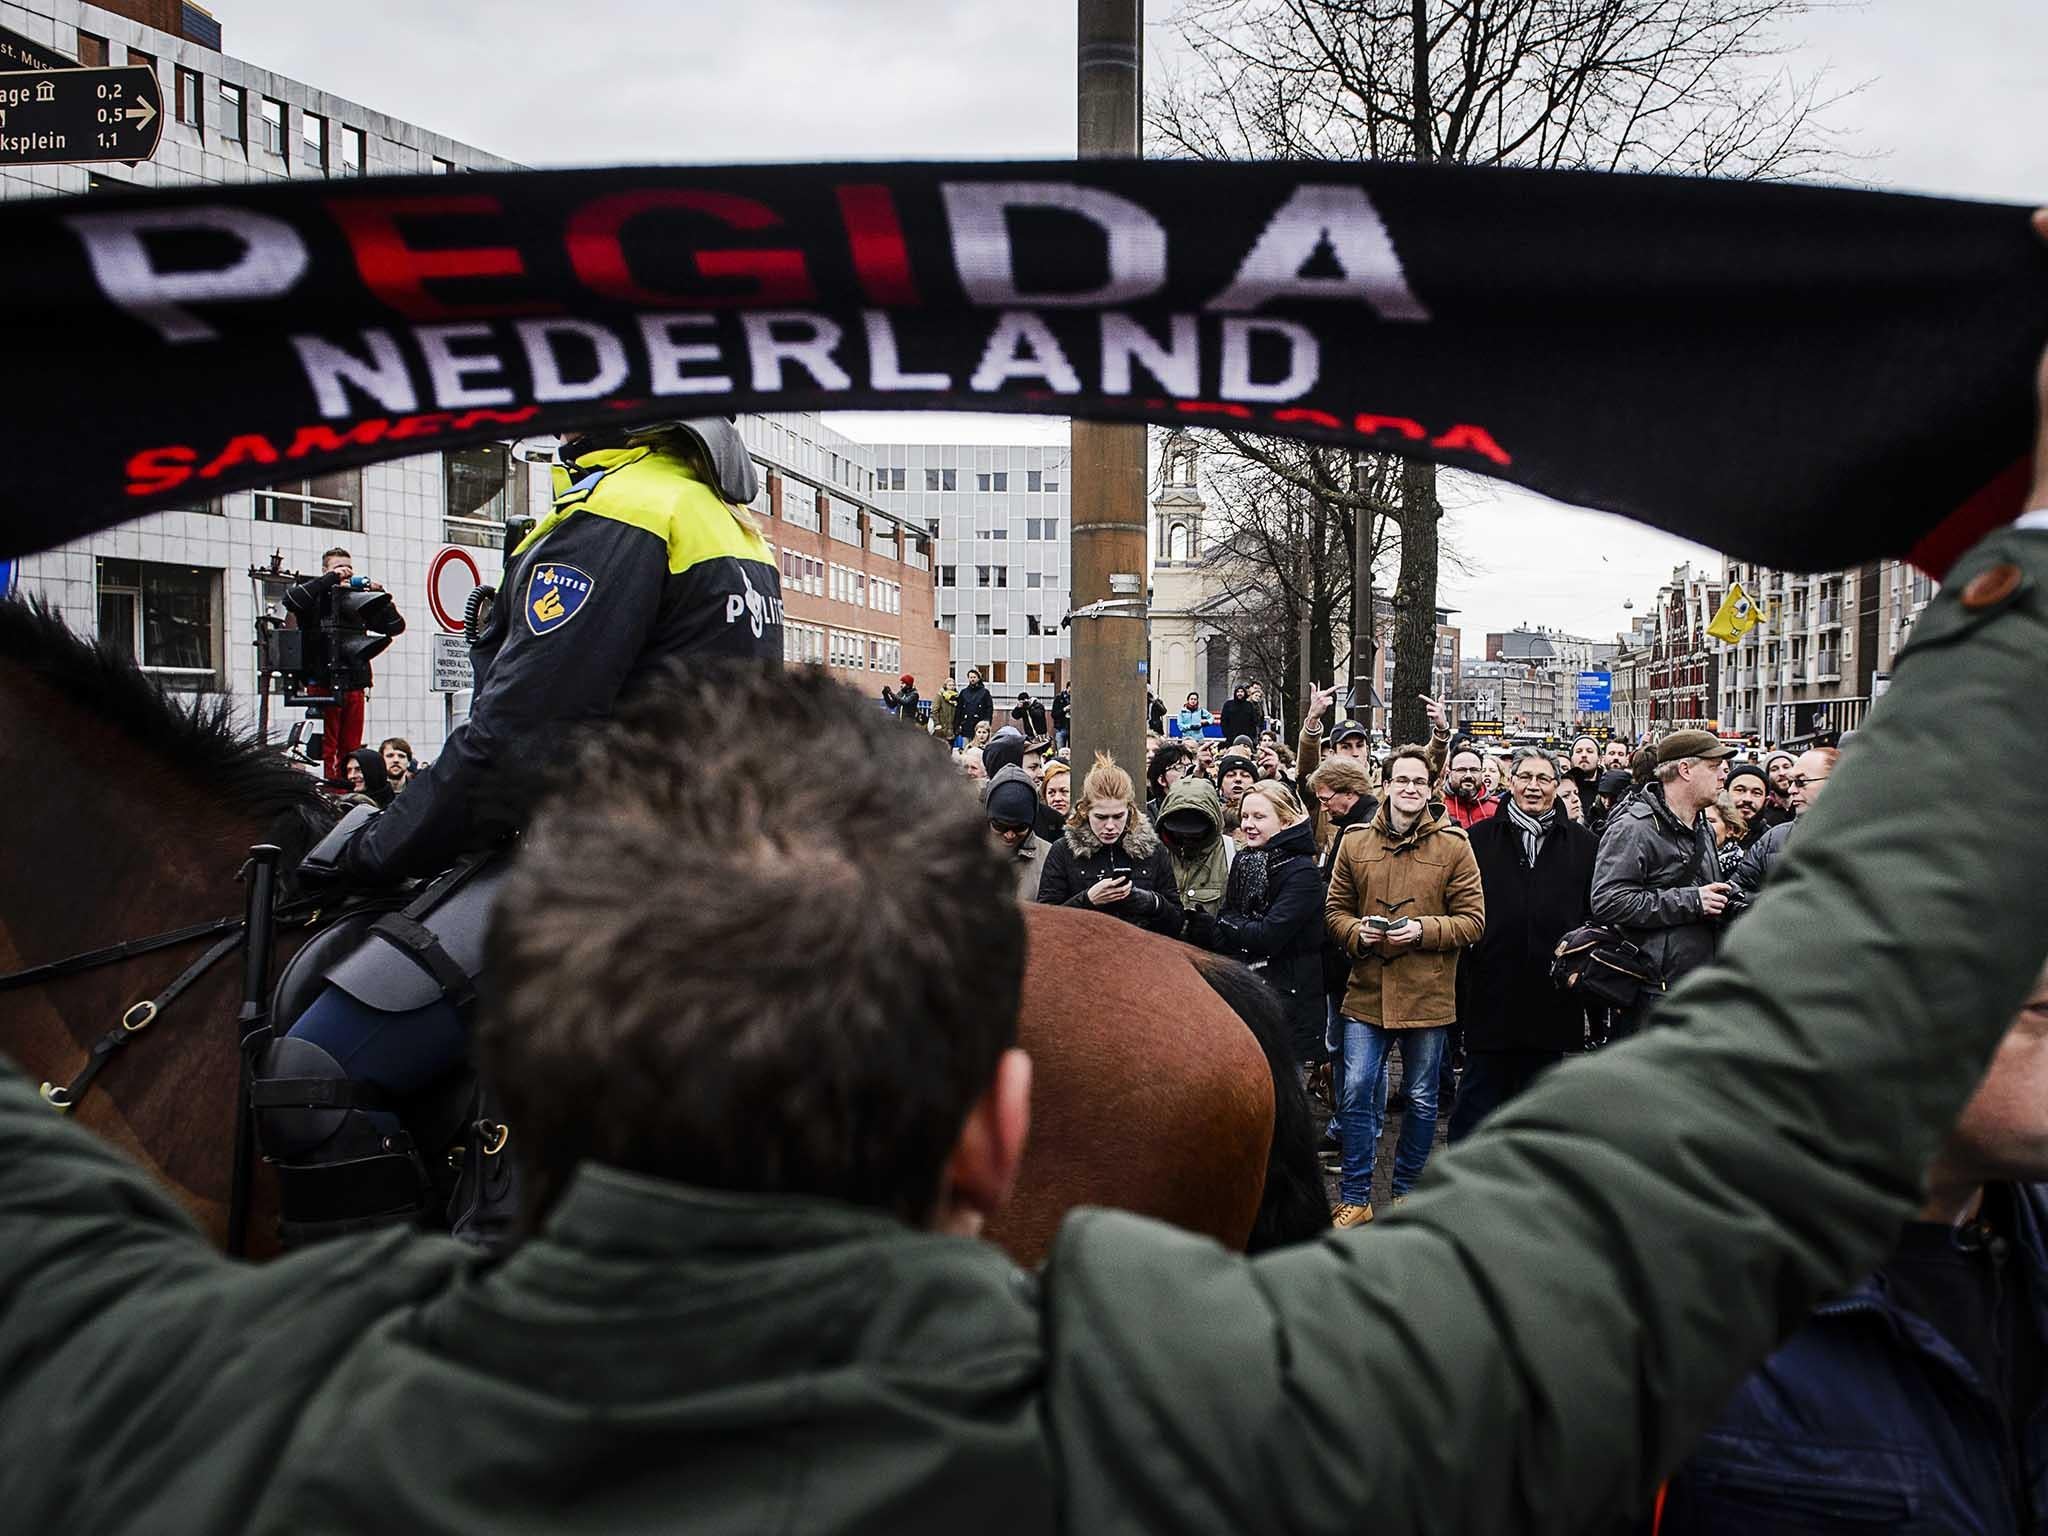 Members of Pegida?face counter-protesters during a demonstration in central Amsterdam